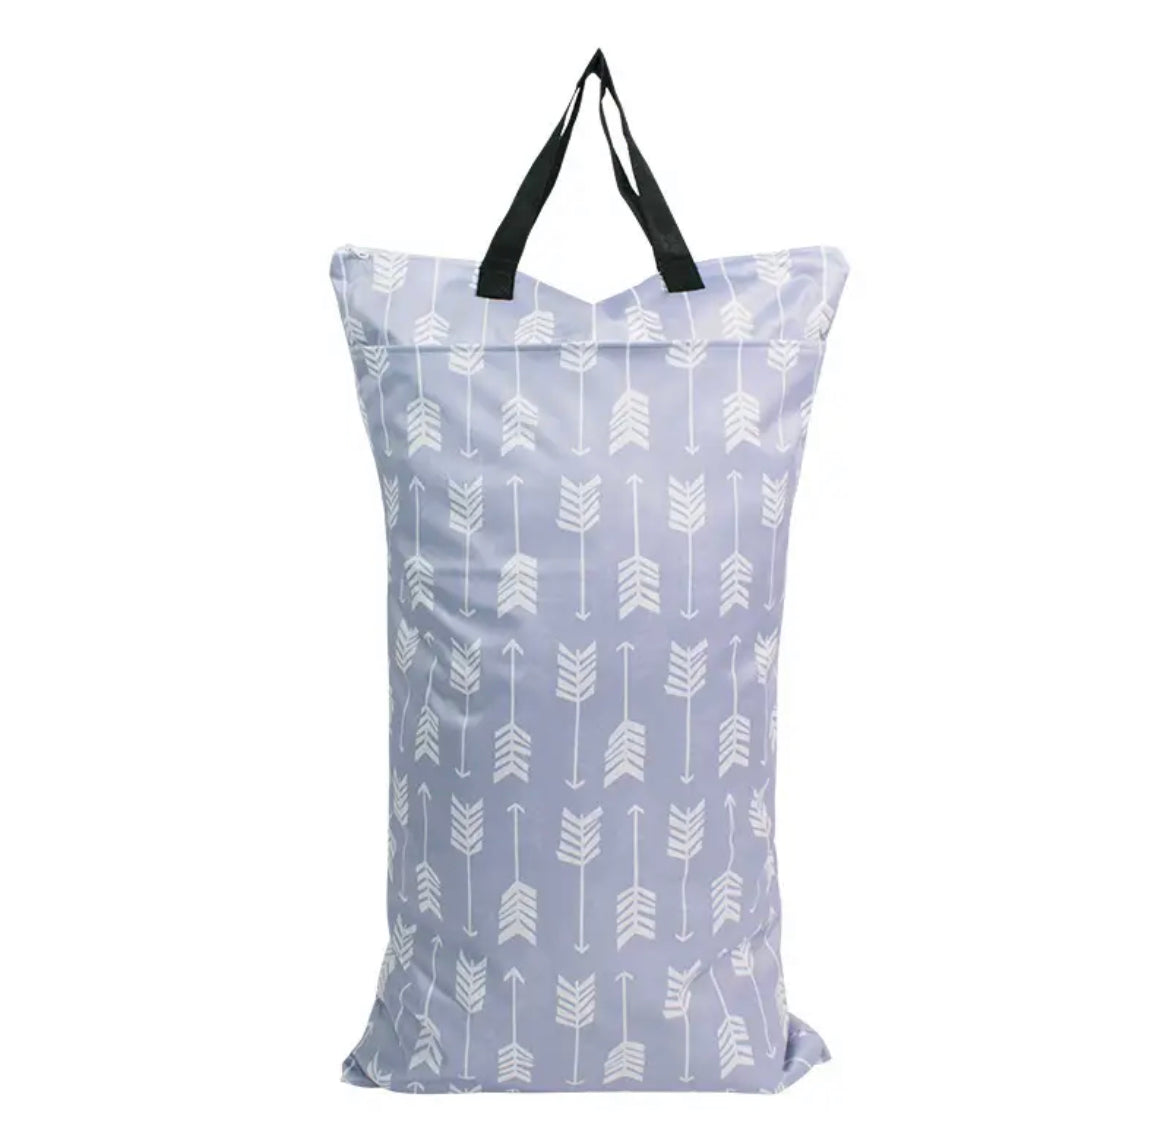 EXTRA LARGE Wet/Dry Bag ** Double Zipper**